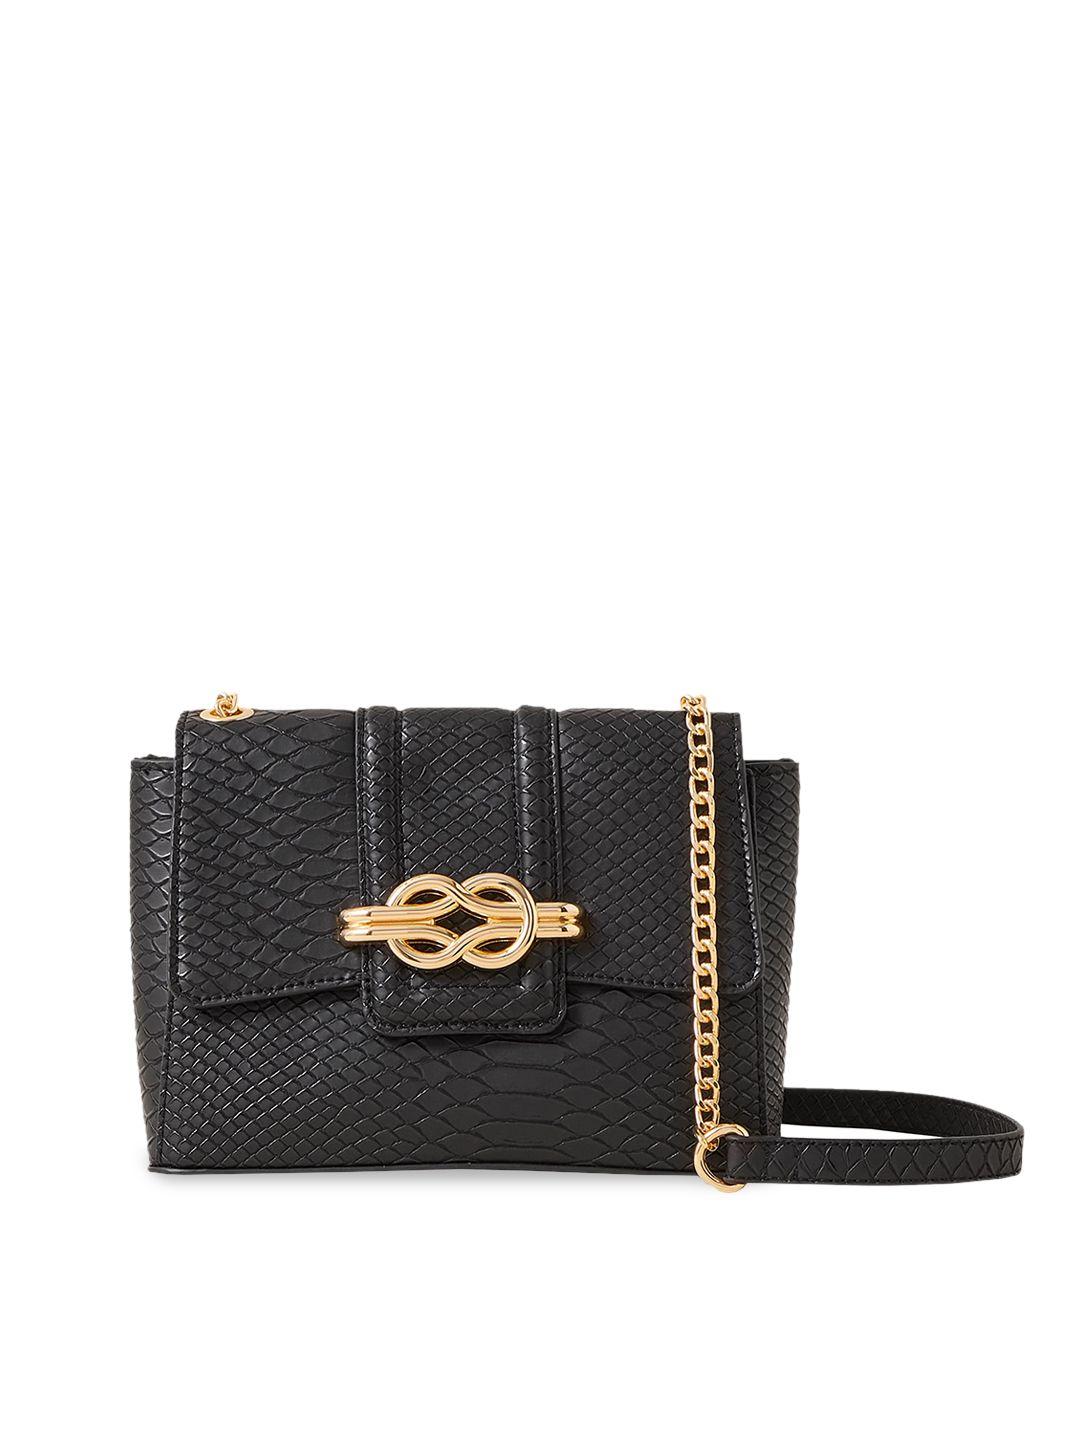 accessorize textured pu swagger sling bag